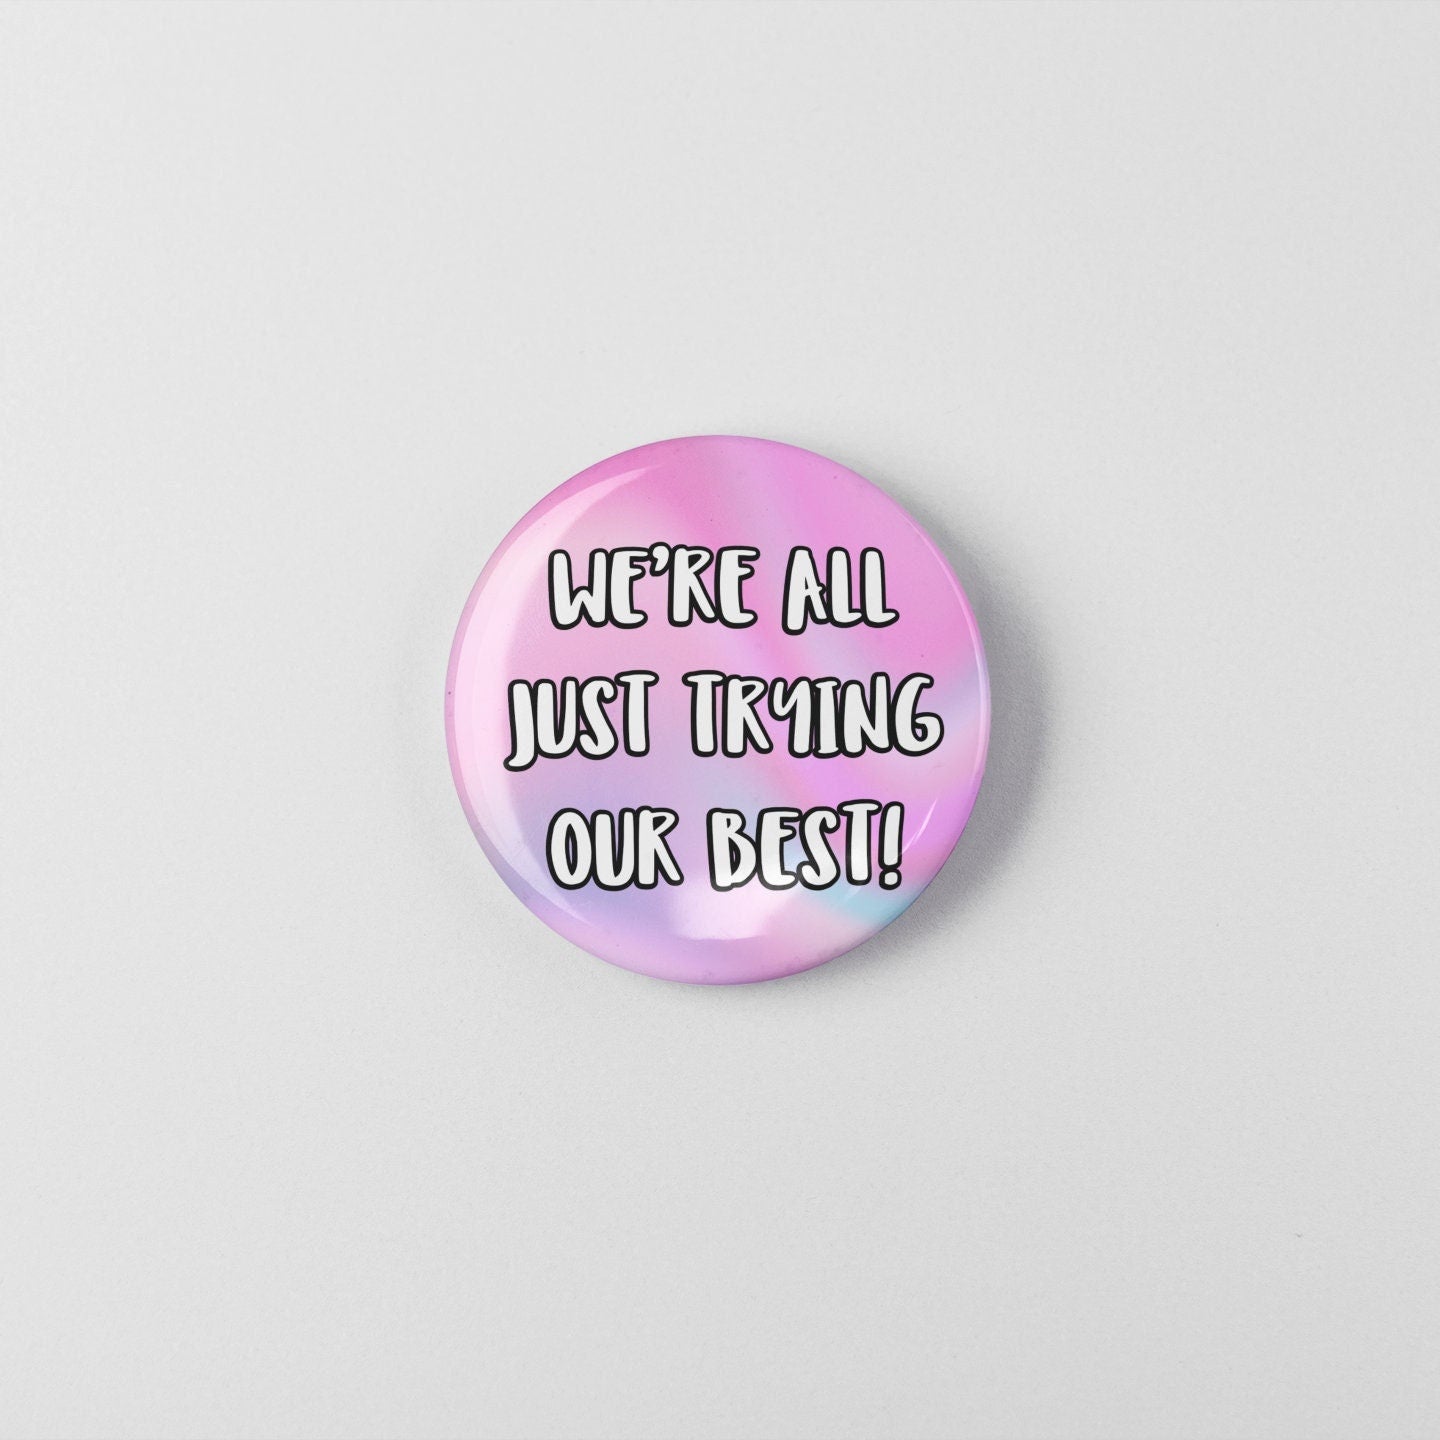 We're All Just Trying Our Best! - Badge Pin | Happy Gifts, Mental Health, Positive Gift